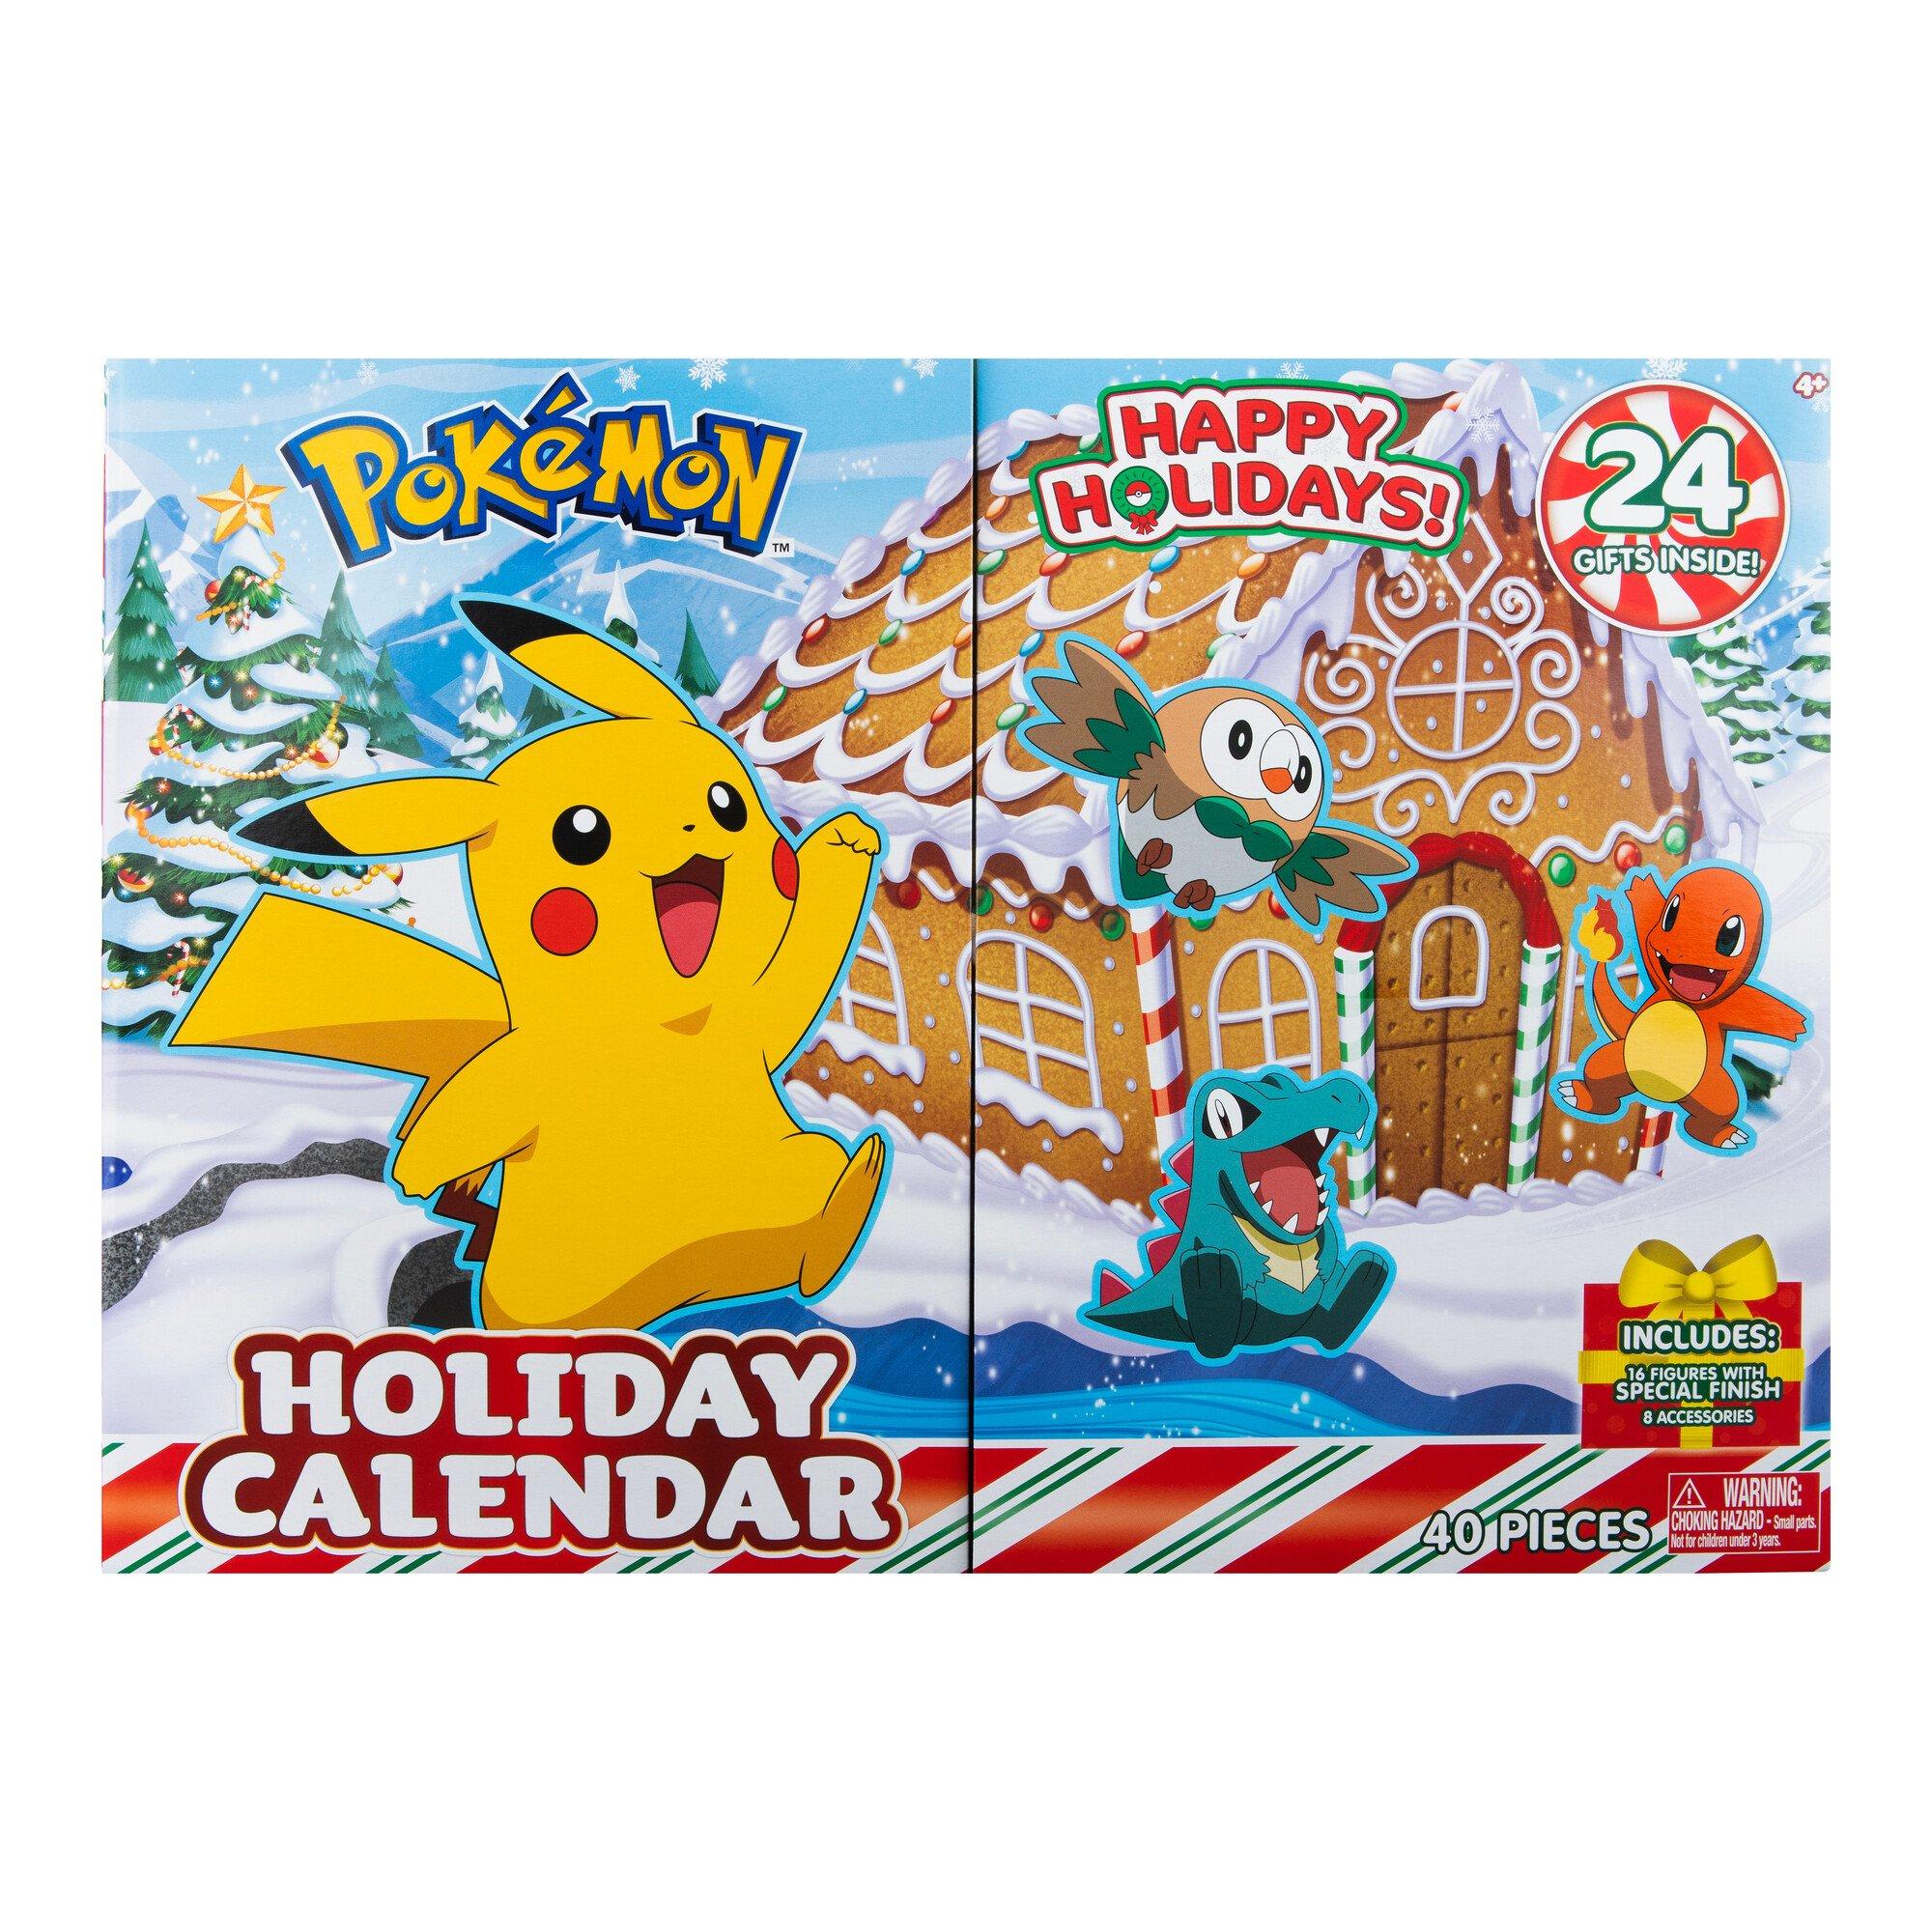 opening up the pokemon holiday calendar! this is also my last